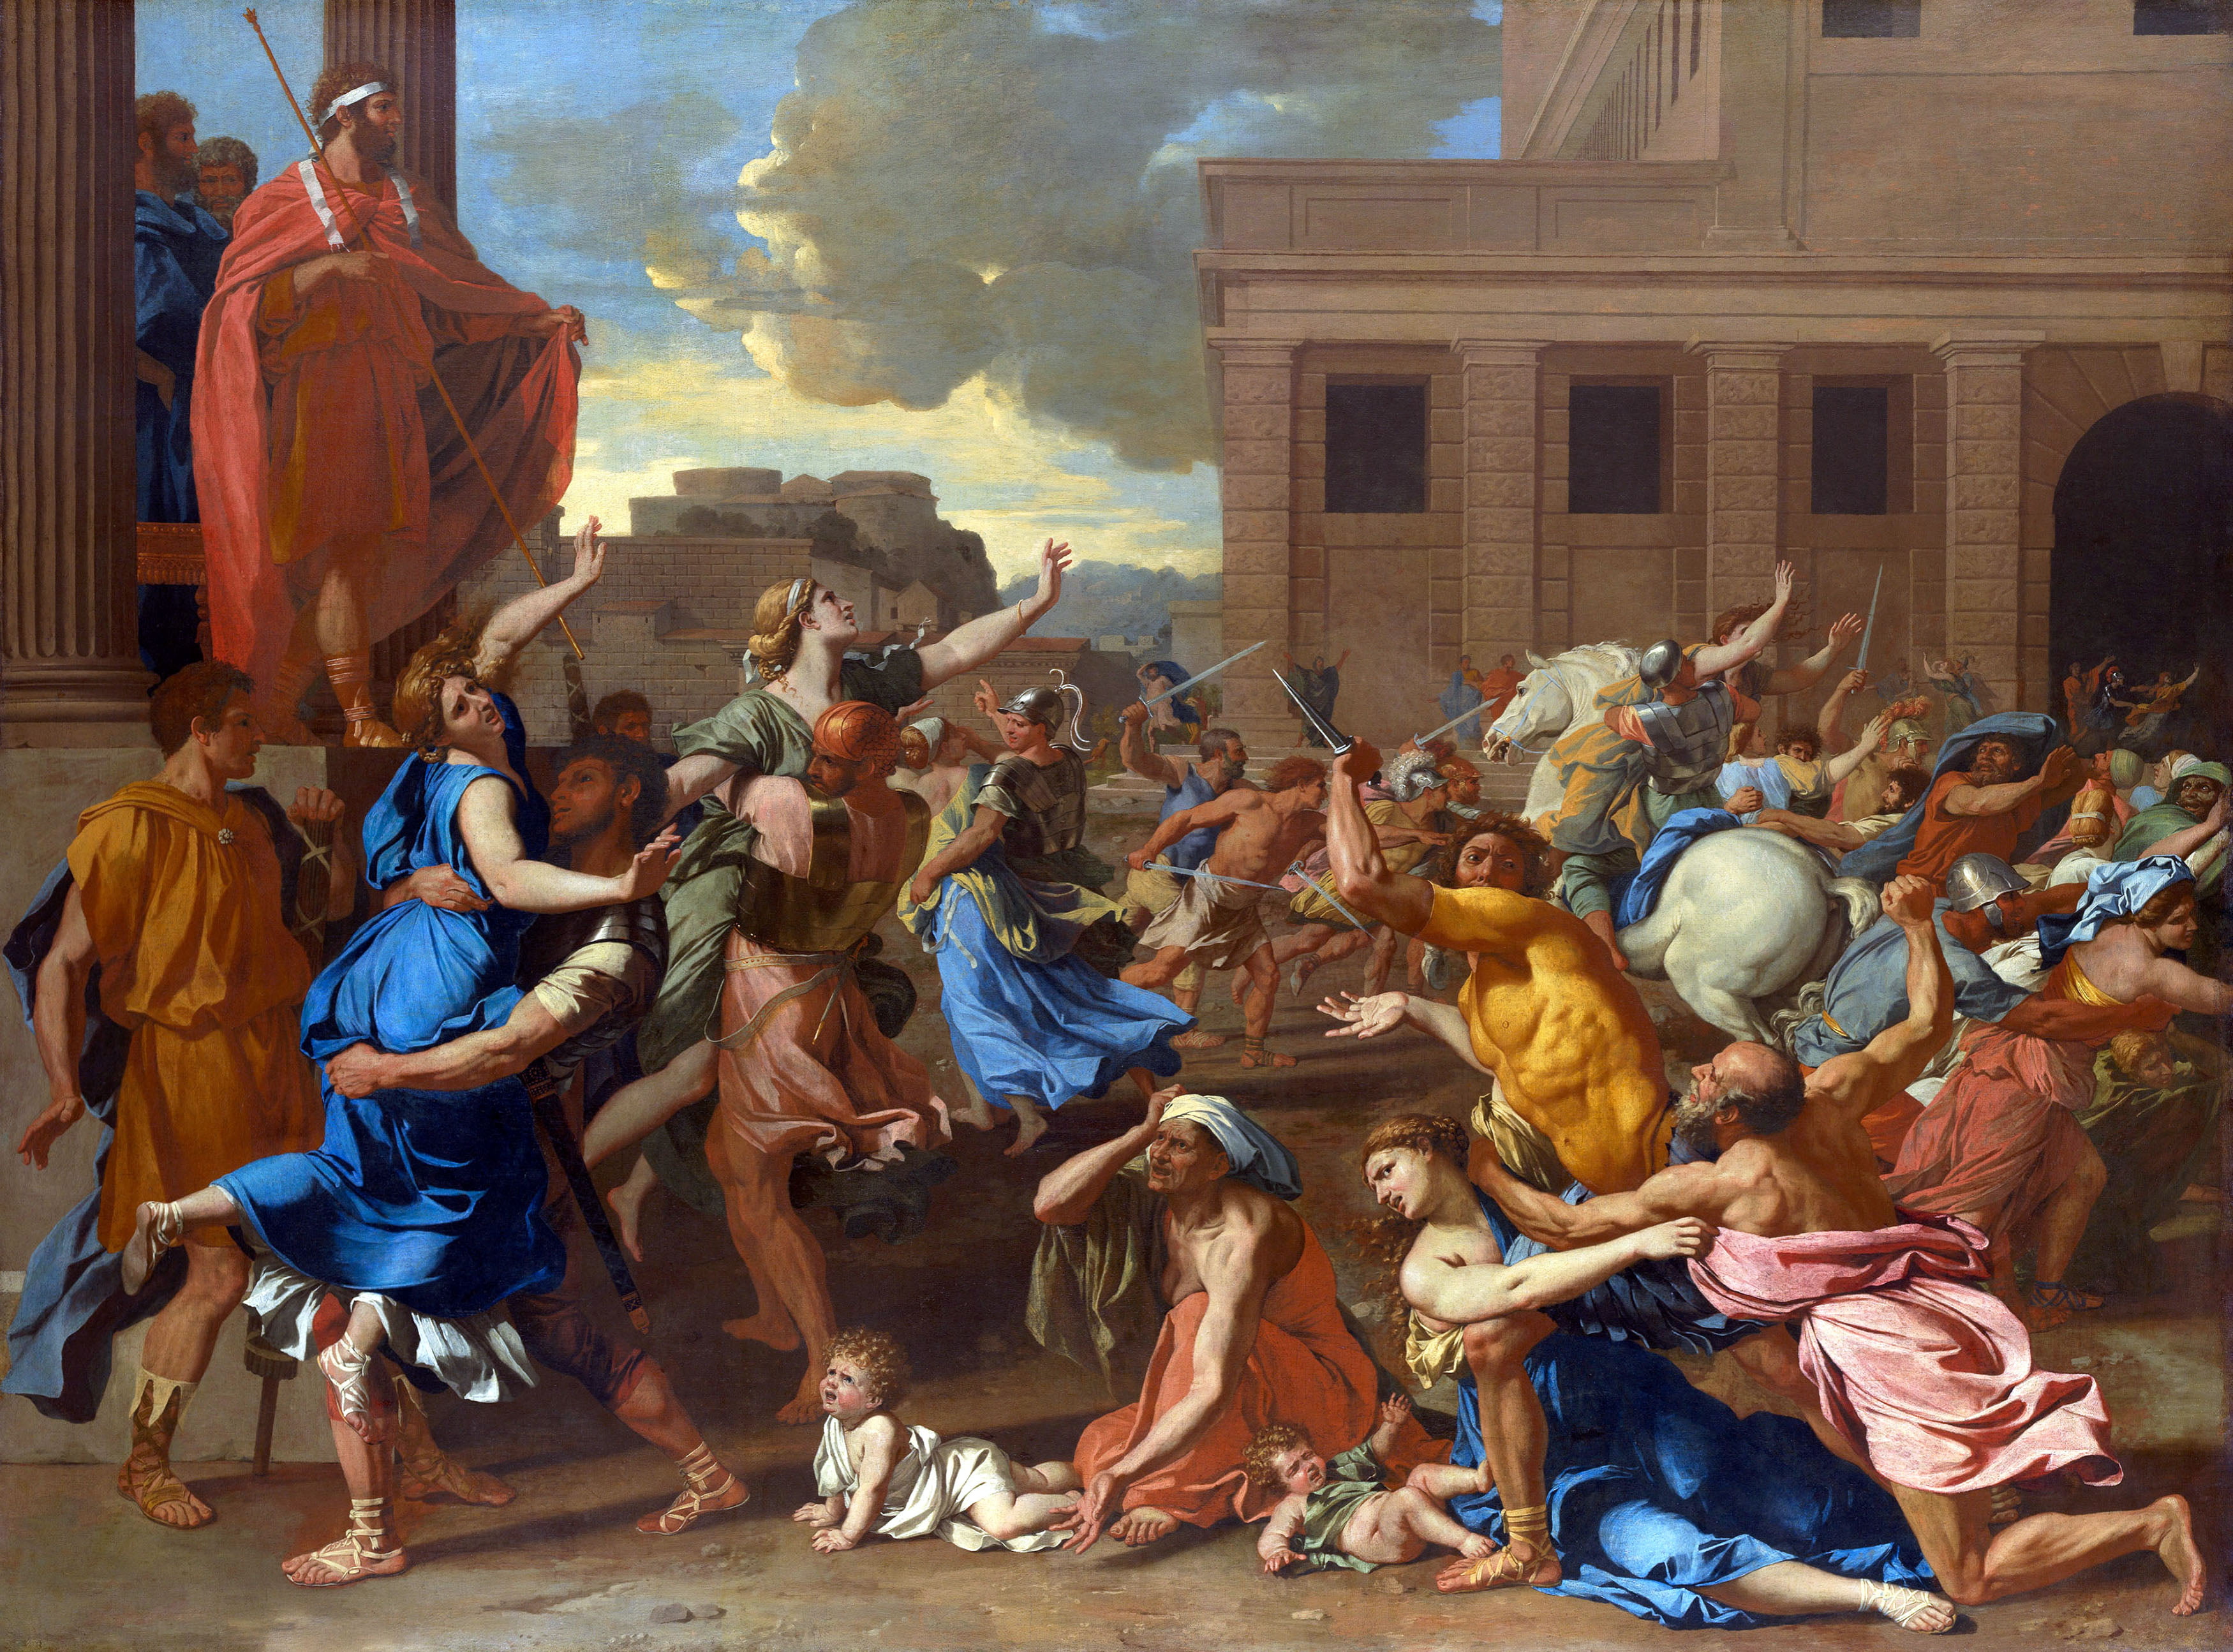 painting, classic art, Rome, Nicolas Poussin, The Abduction of the Sabine Women